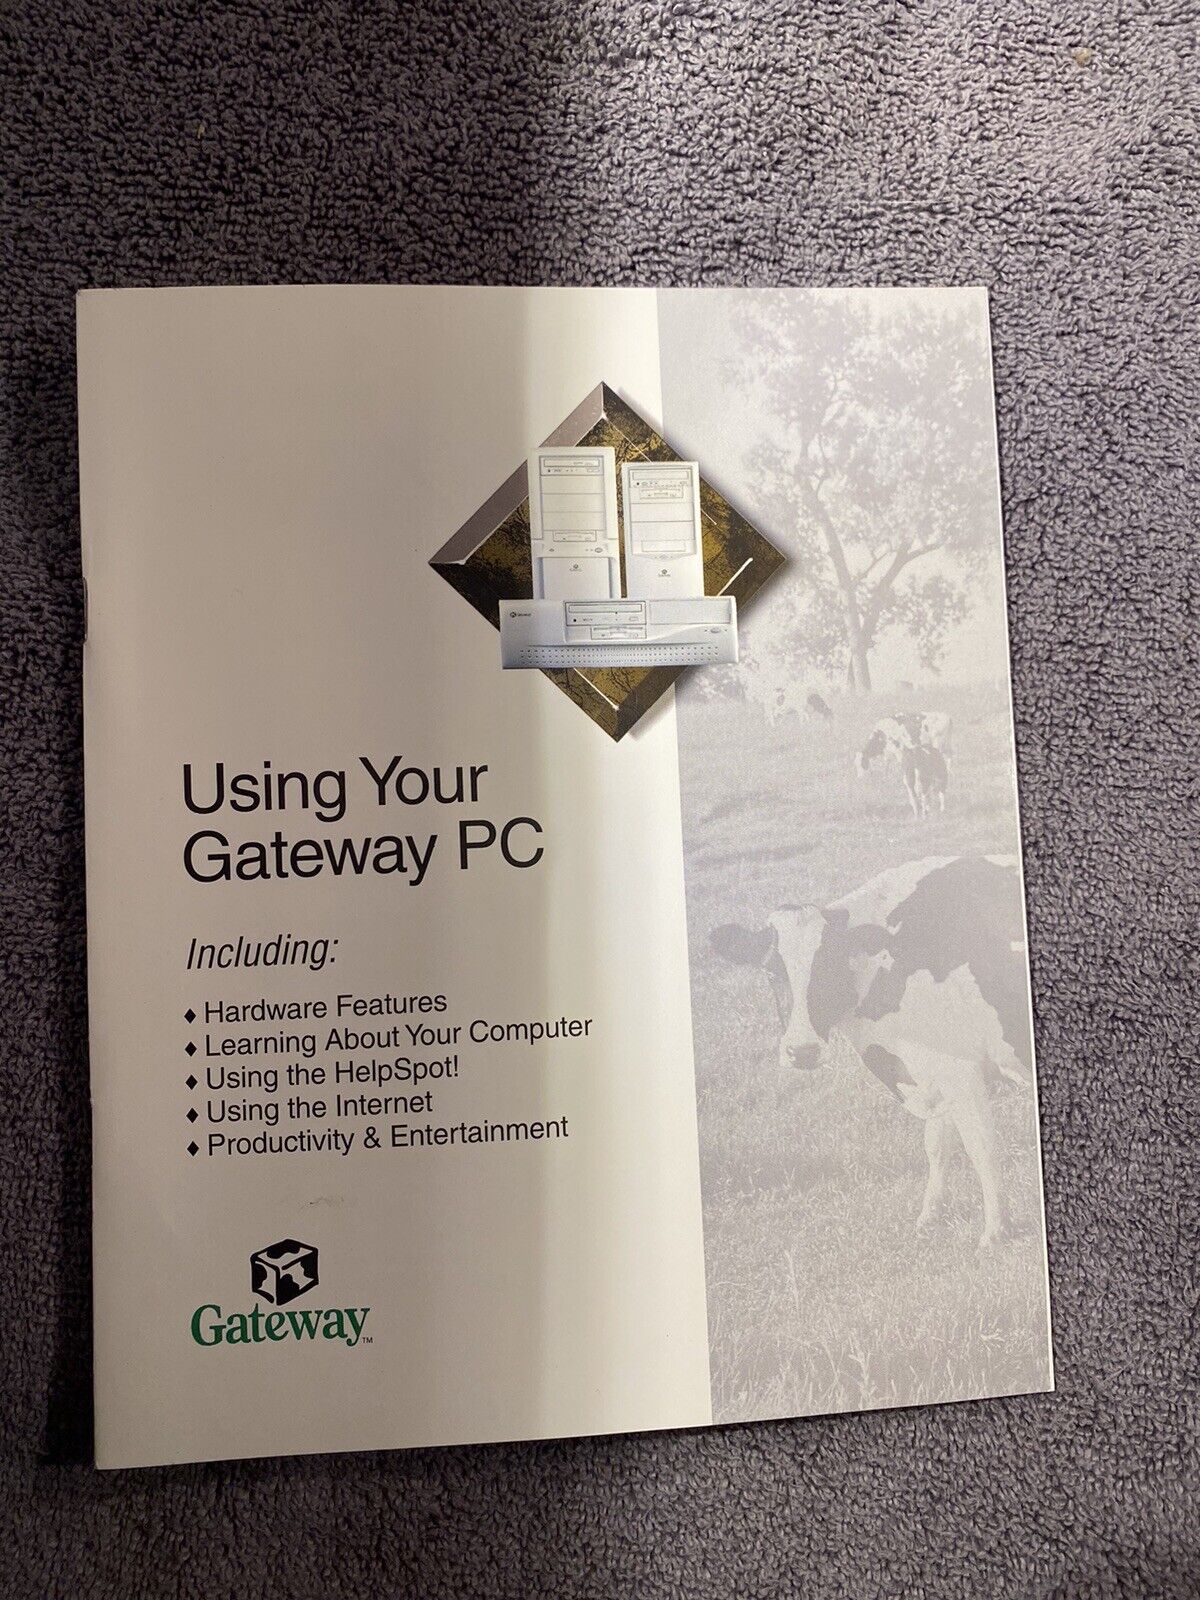 Using Your Gateway PC 1998 User Manual Guide booklet vintage computer book